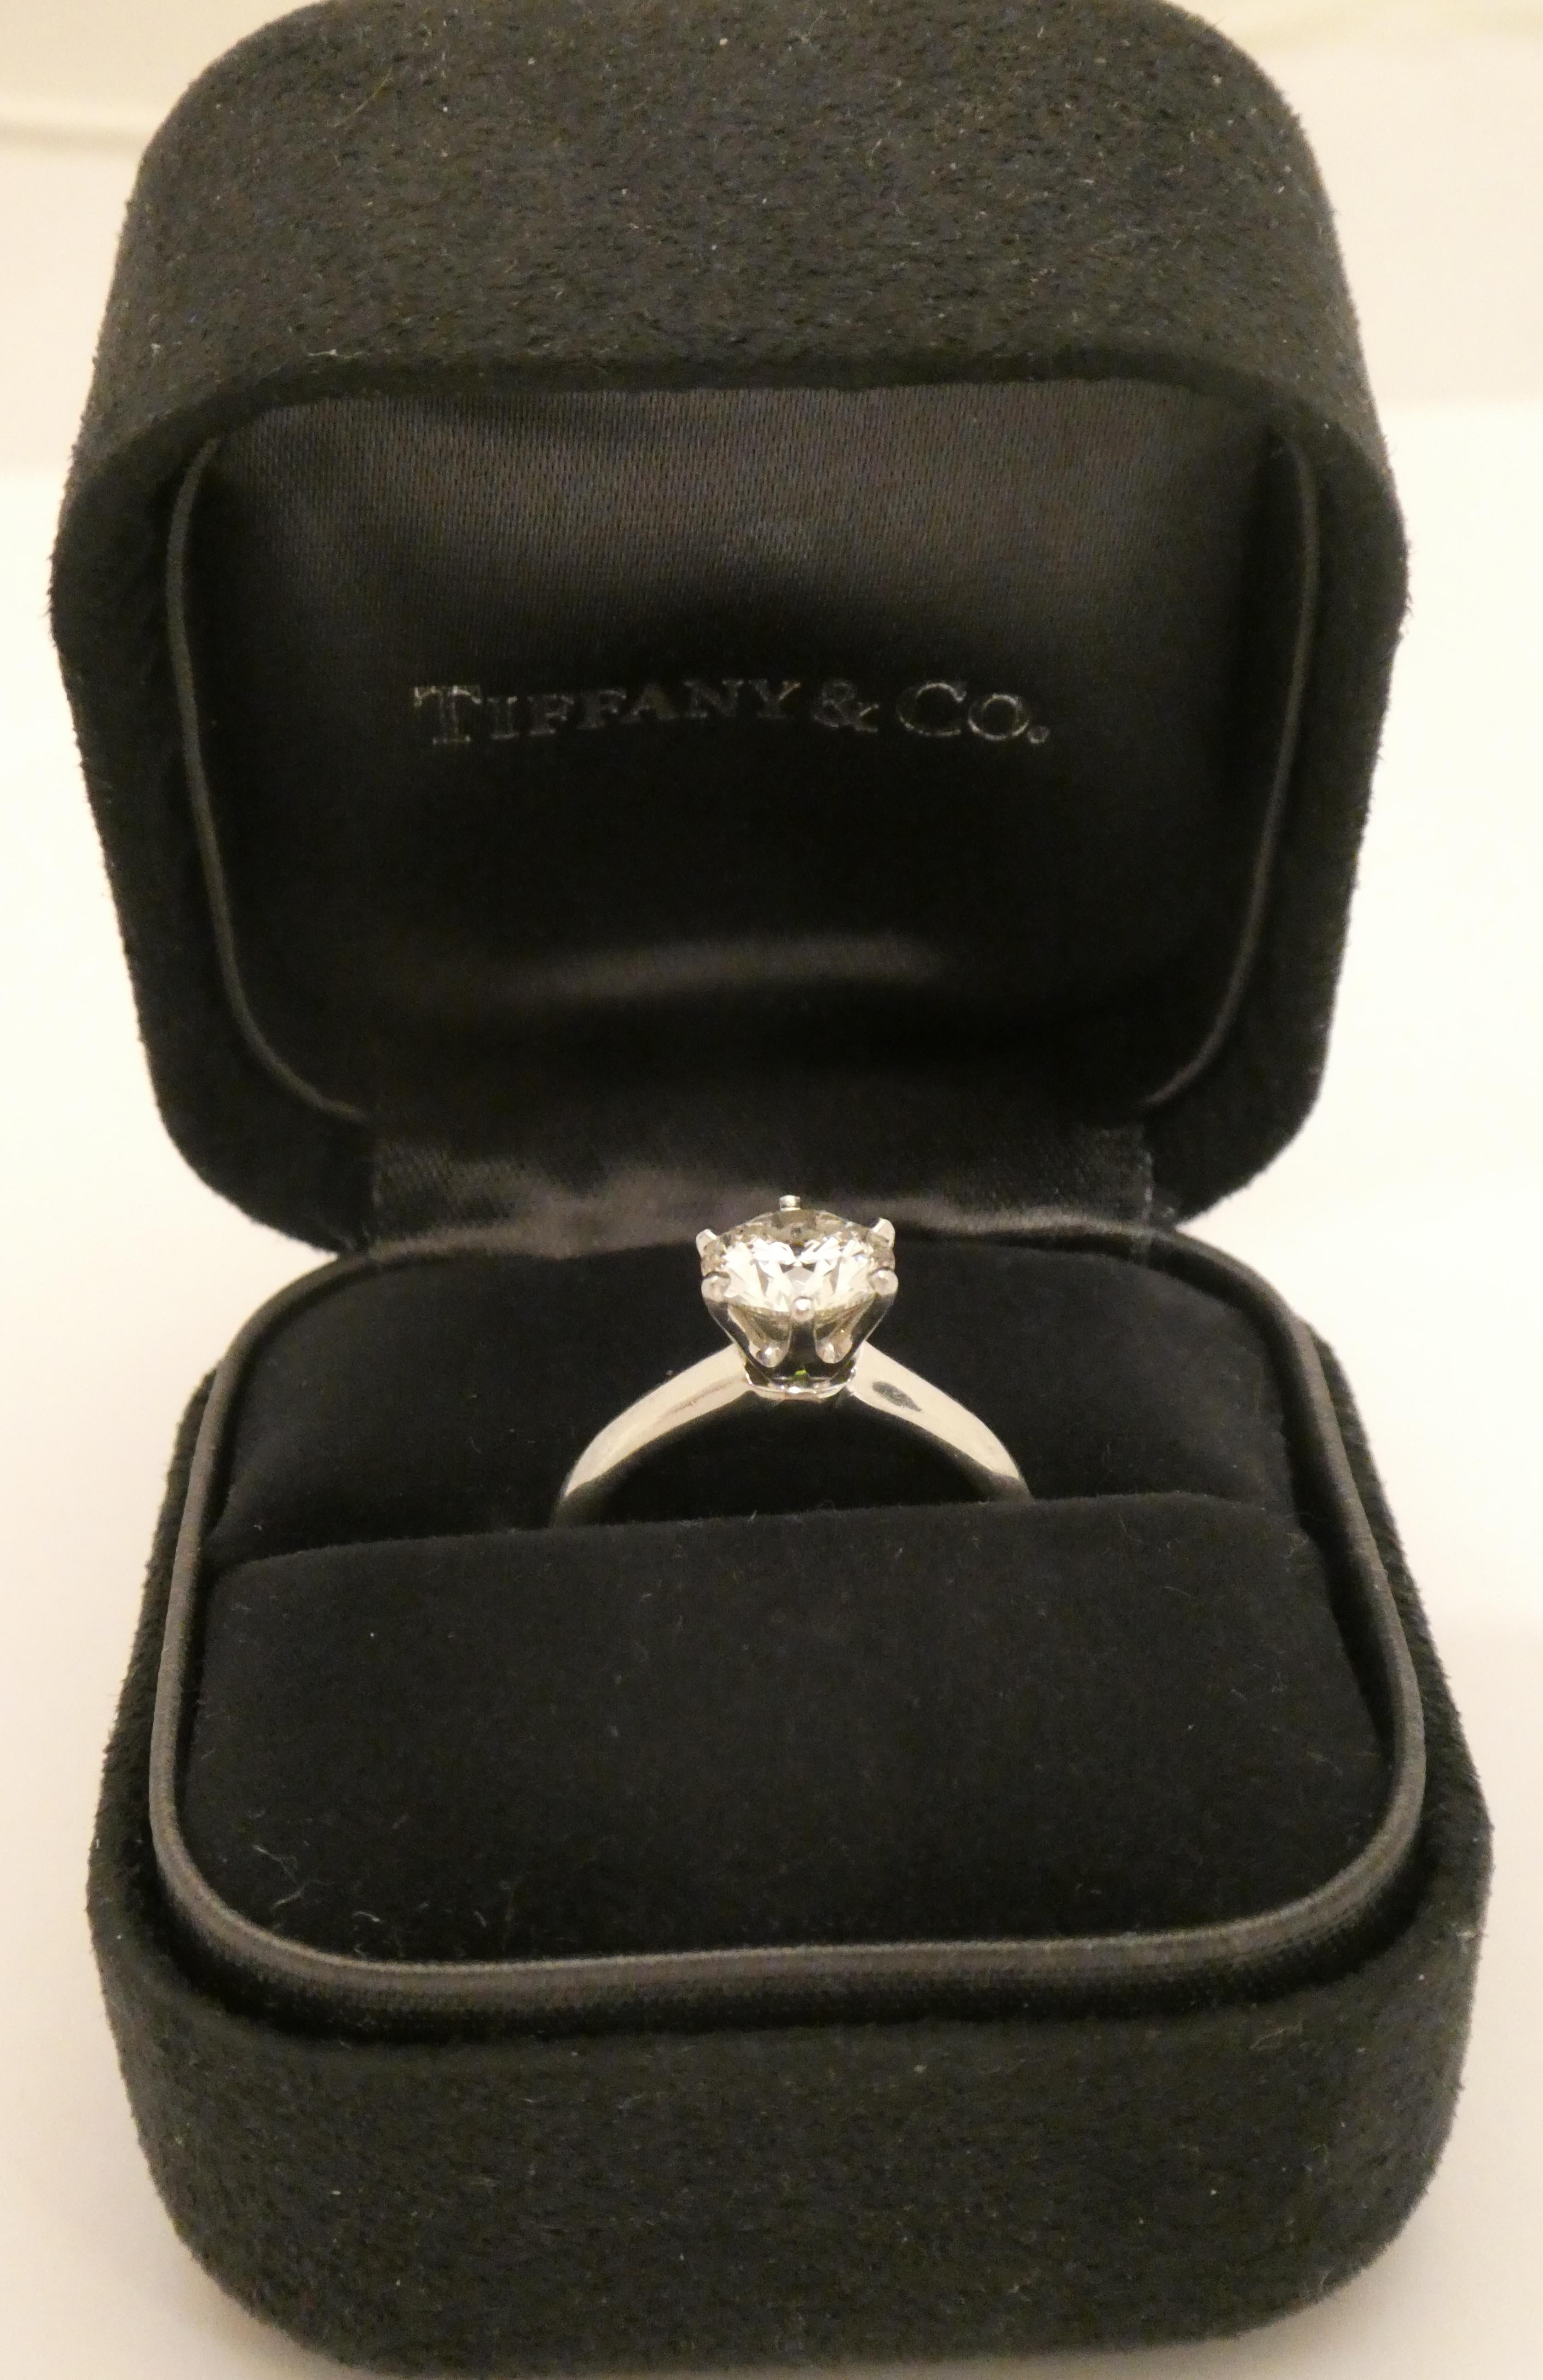 A true design masterpiece, the Tiffany® Setting is the world’s most iconic engagement ring. Flawlessly engineered, the six-prong setting virtually disappears and allows the brilliant diamond to float above the band and into the light, resulting in a